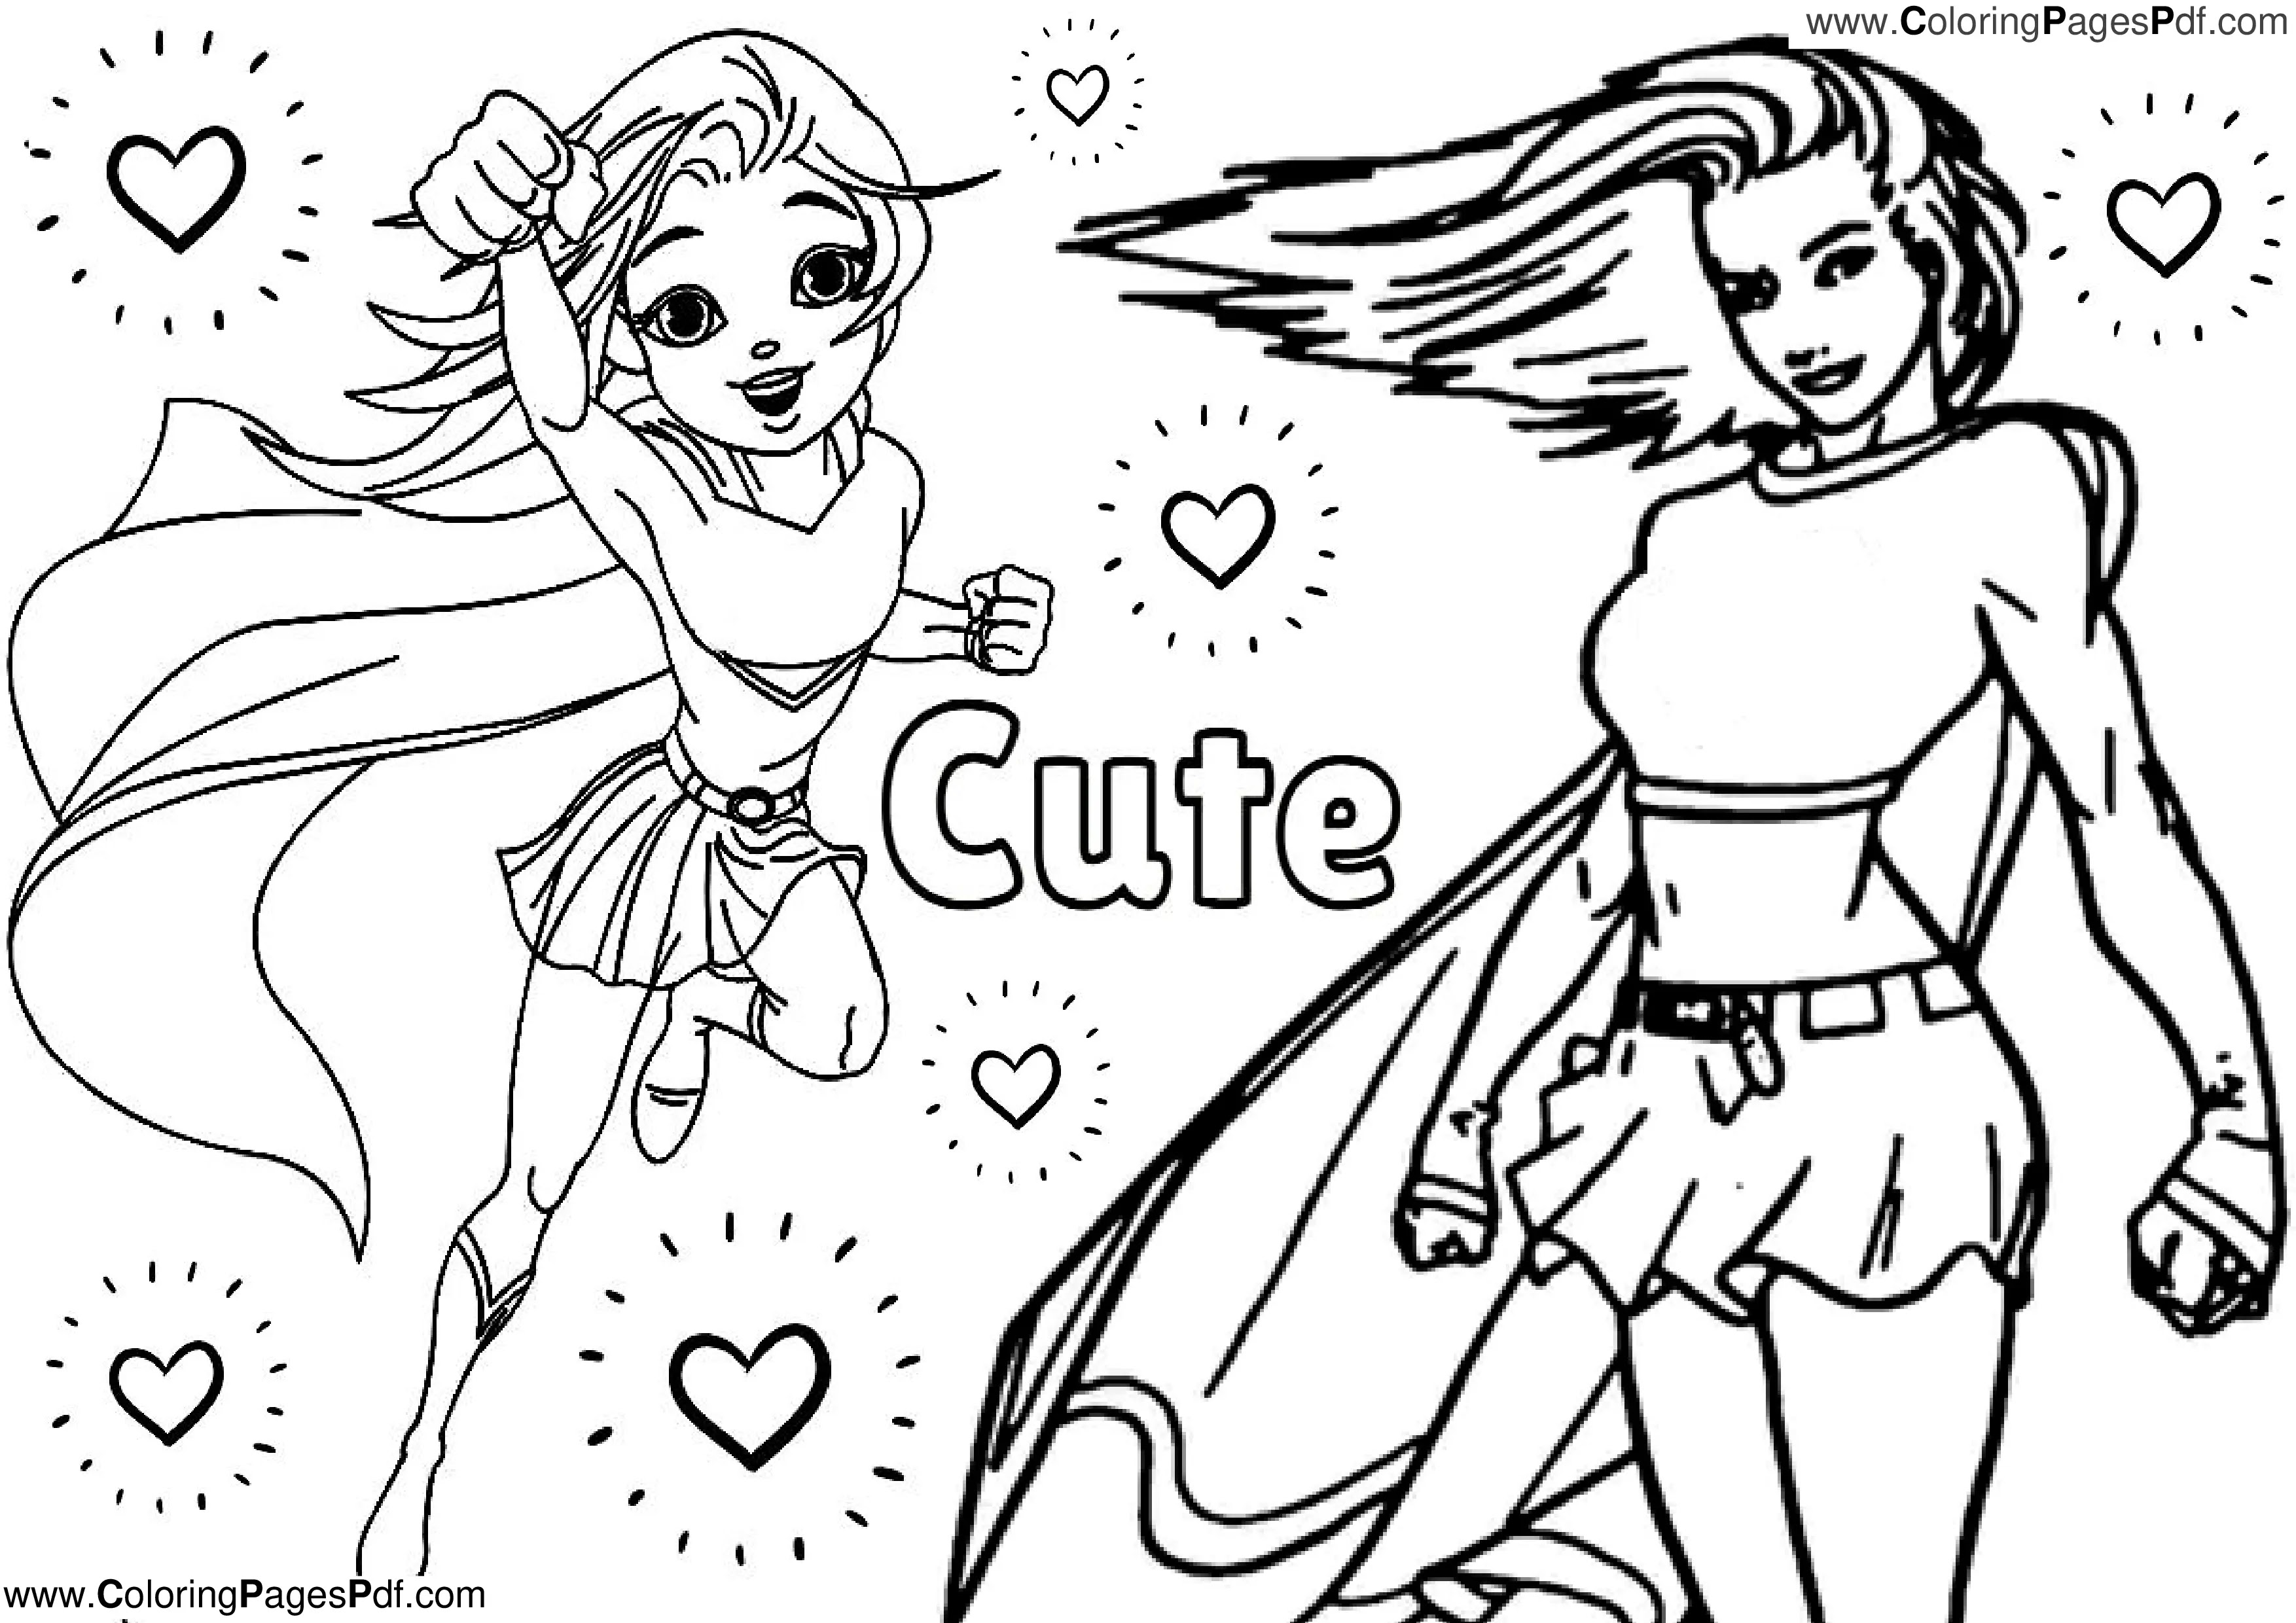 Flash coloring pages for girls